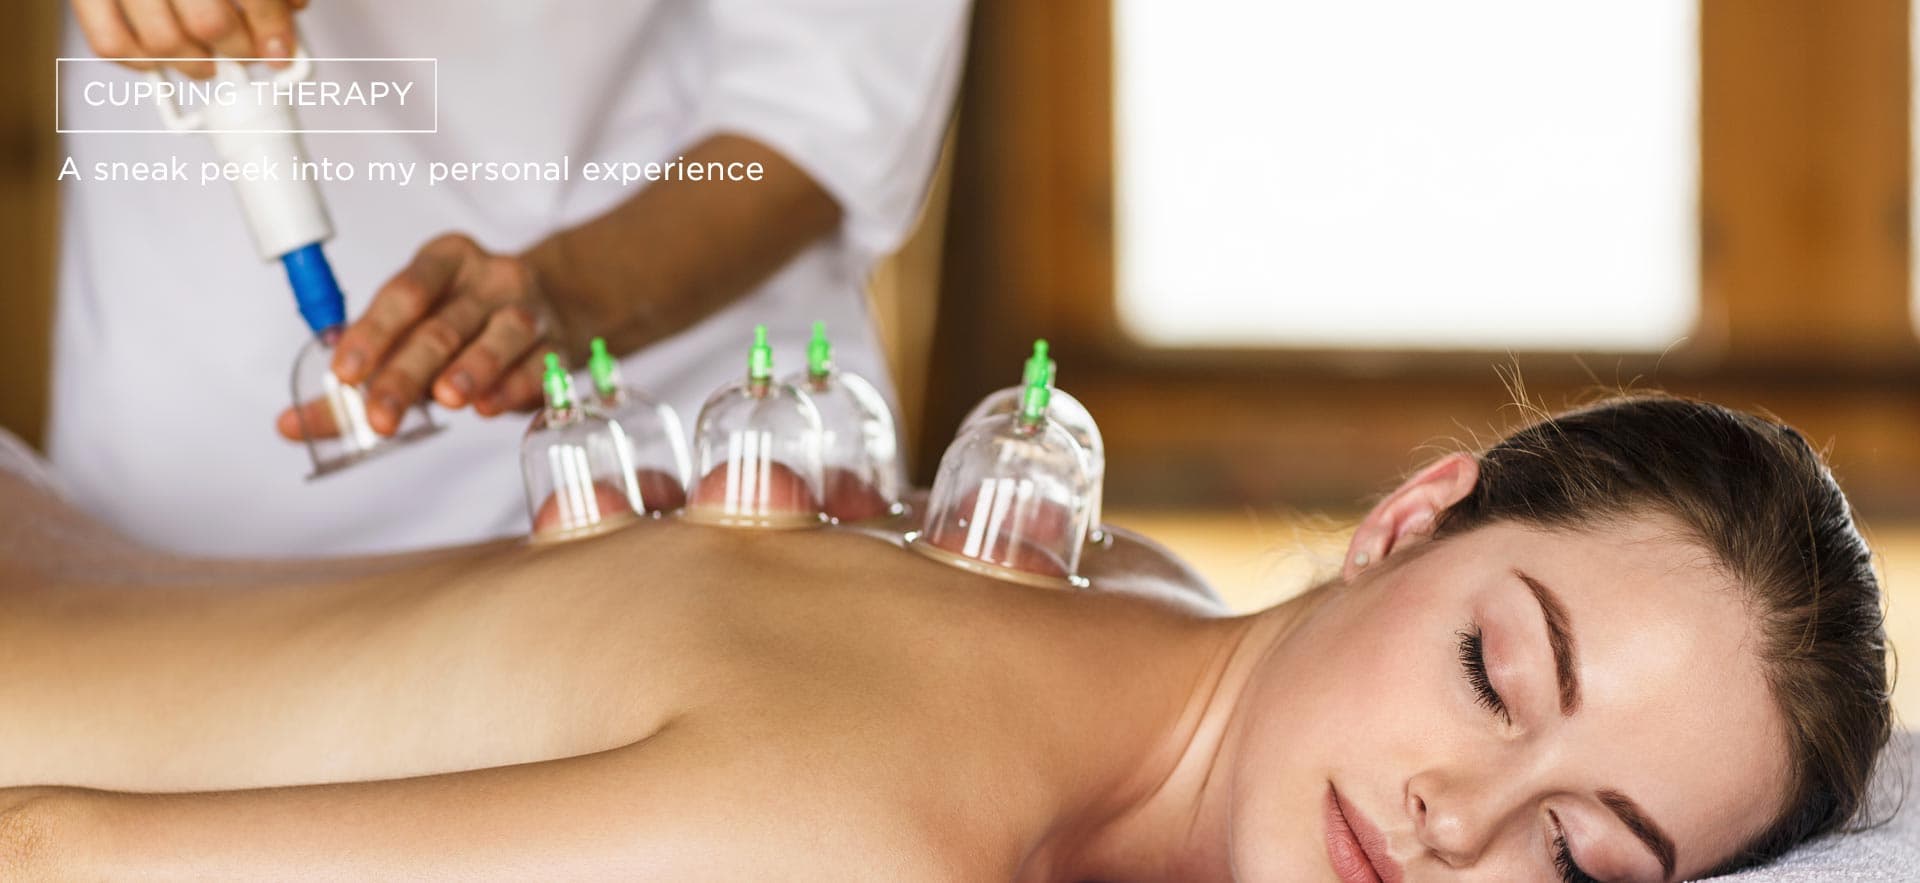 Best Cupping Therapy for Women in Bandra